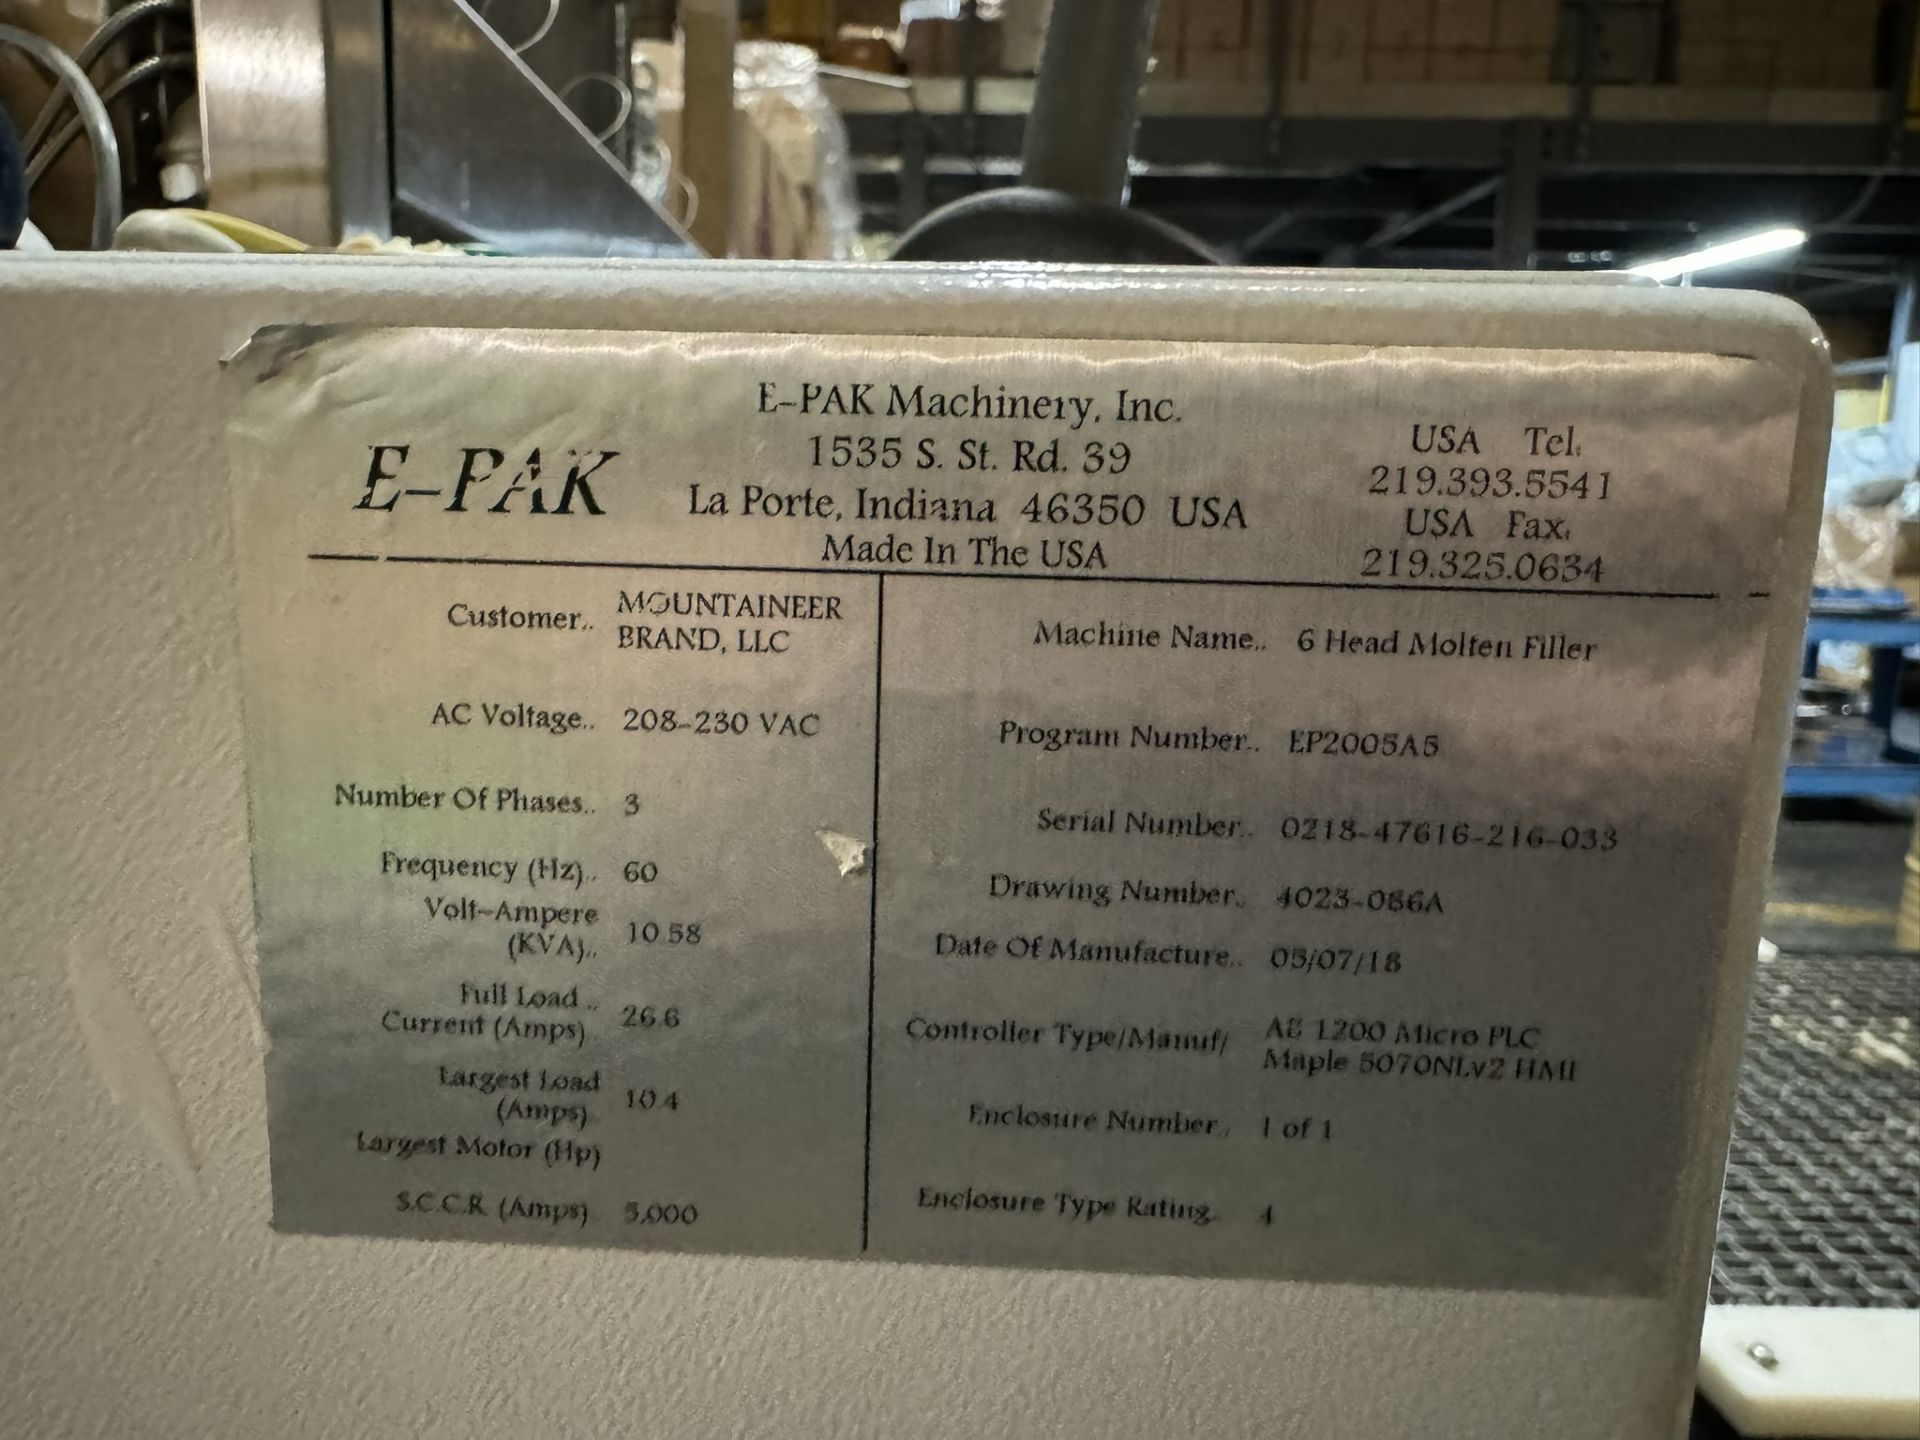 2018 E-PAK 6-Head Molten Filler, S/N 0218-47616-216-033, 208 Volts, 3 Phase, with Control Panel, - Image 6 of 11